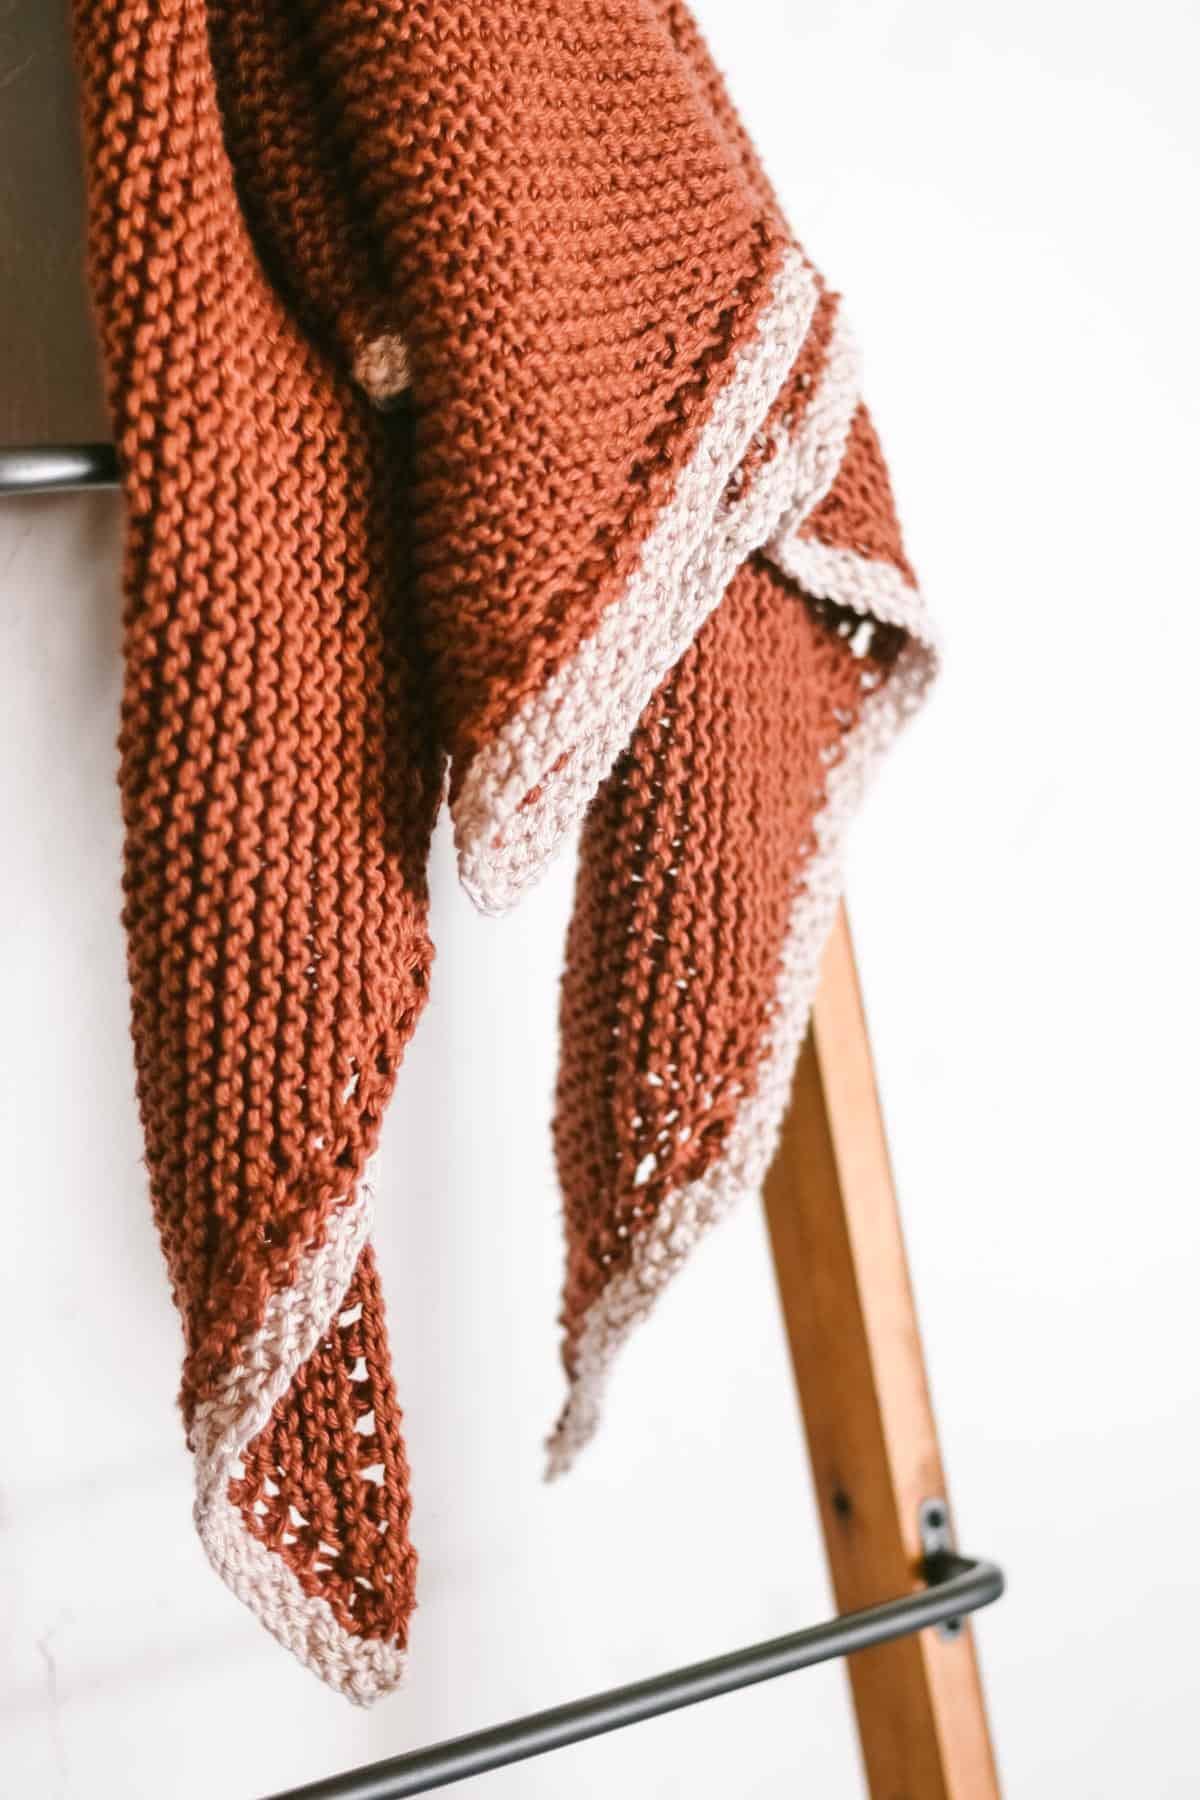 Rust colored garter stitch knit triangle scarf draped over a blanket ladder.